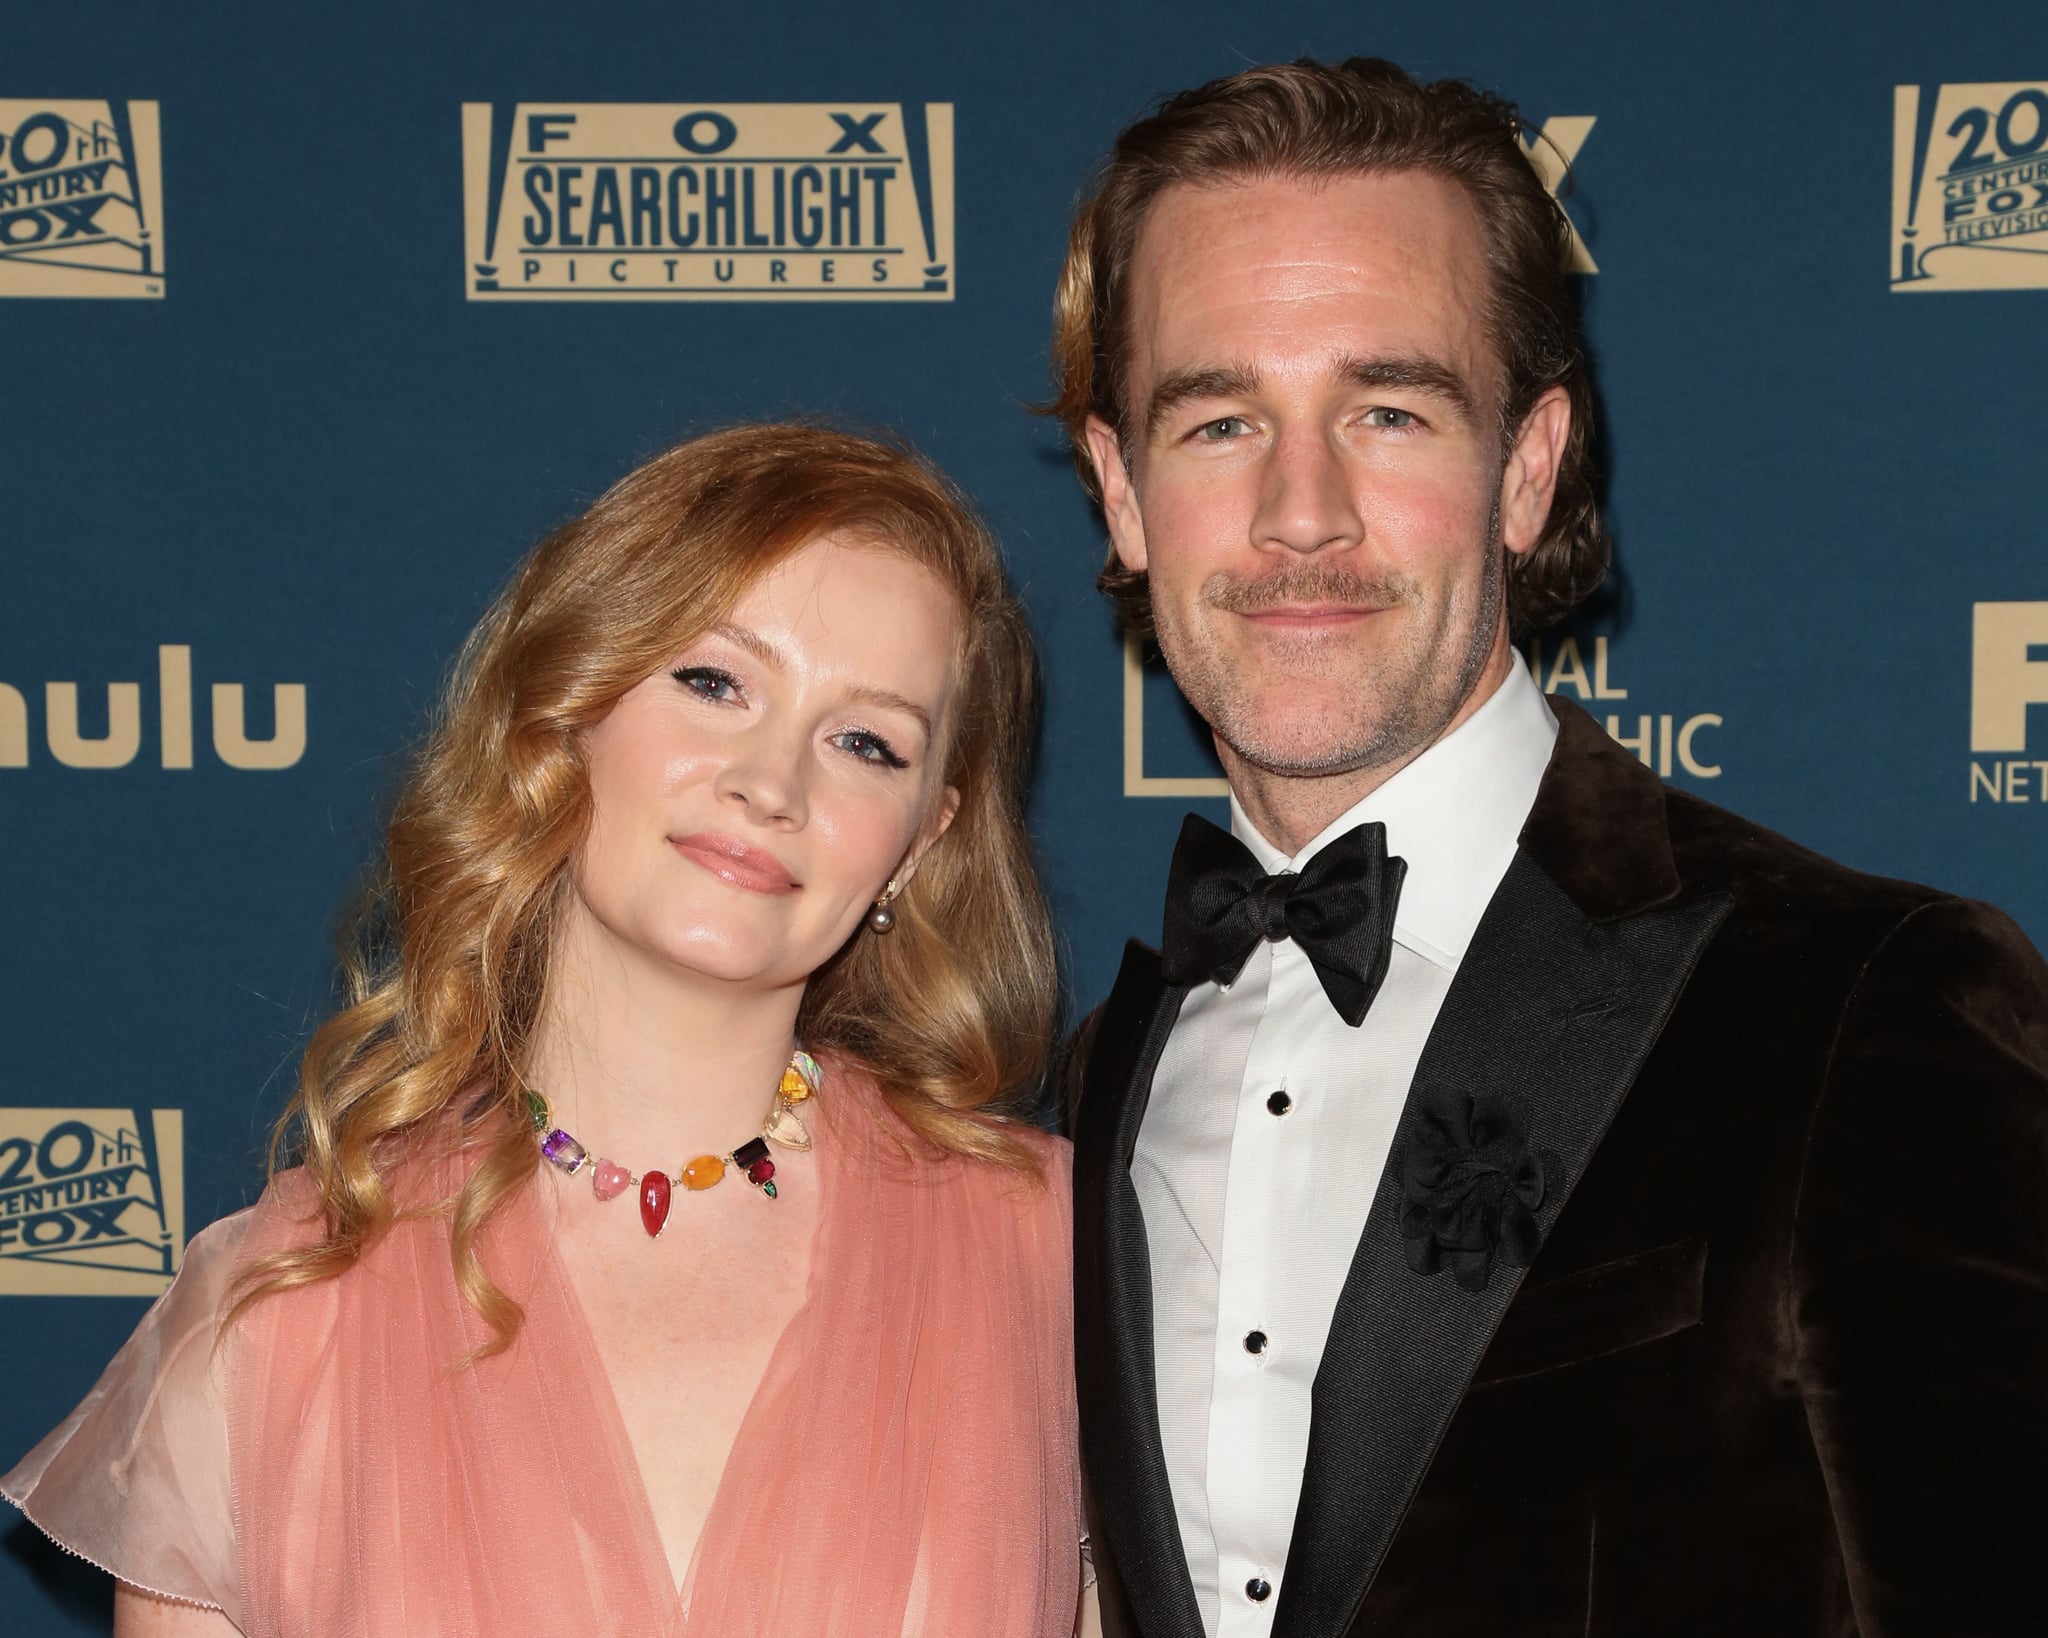 BEVERLY HILLS, CALIFORNIA - JANUARY 06: Producer Kimberly Brook (L) and Actor James Van Der Beek (R) attend the FOX, FX and Hulu 2019 Golden Globe Awards after party at The Beverly Hilton Hotel on January 06, 2019 in Beverly Hills, California. (Photo by Paul Archuleta/FilmMagic)